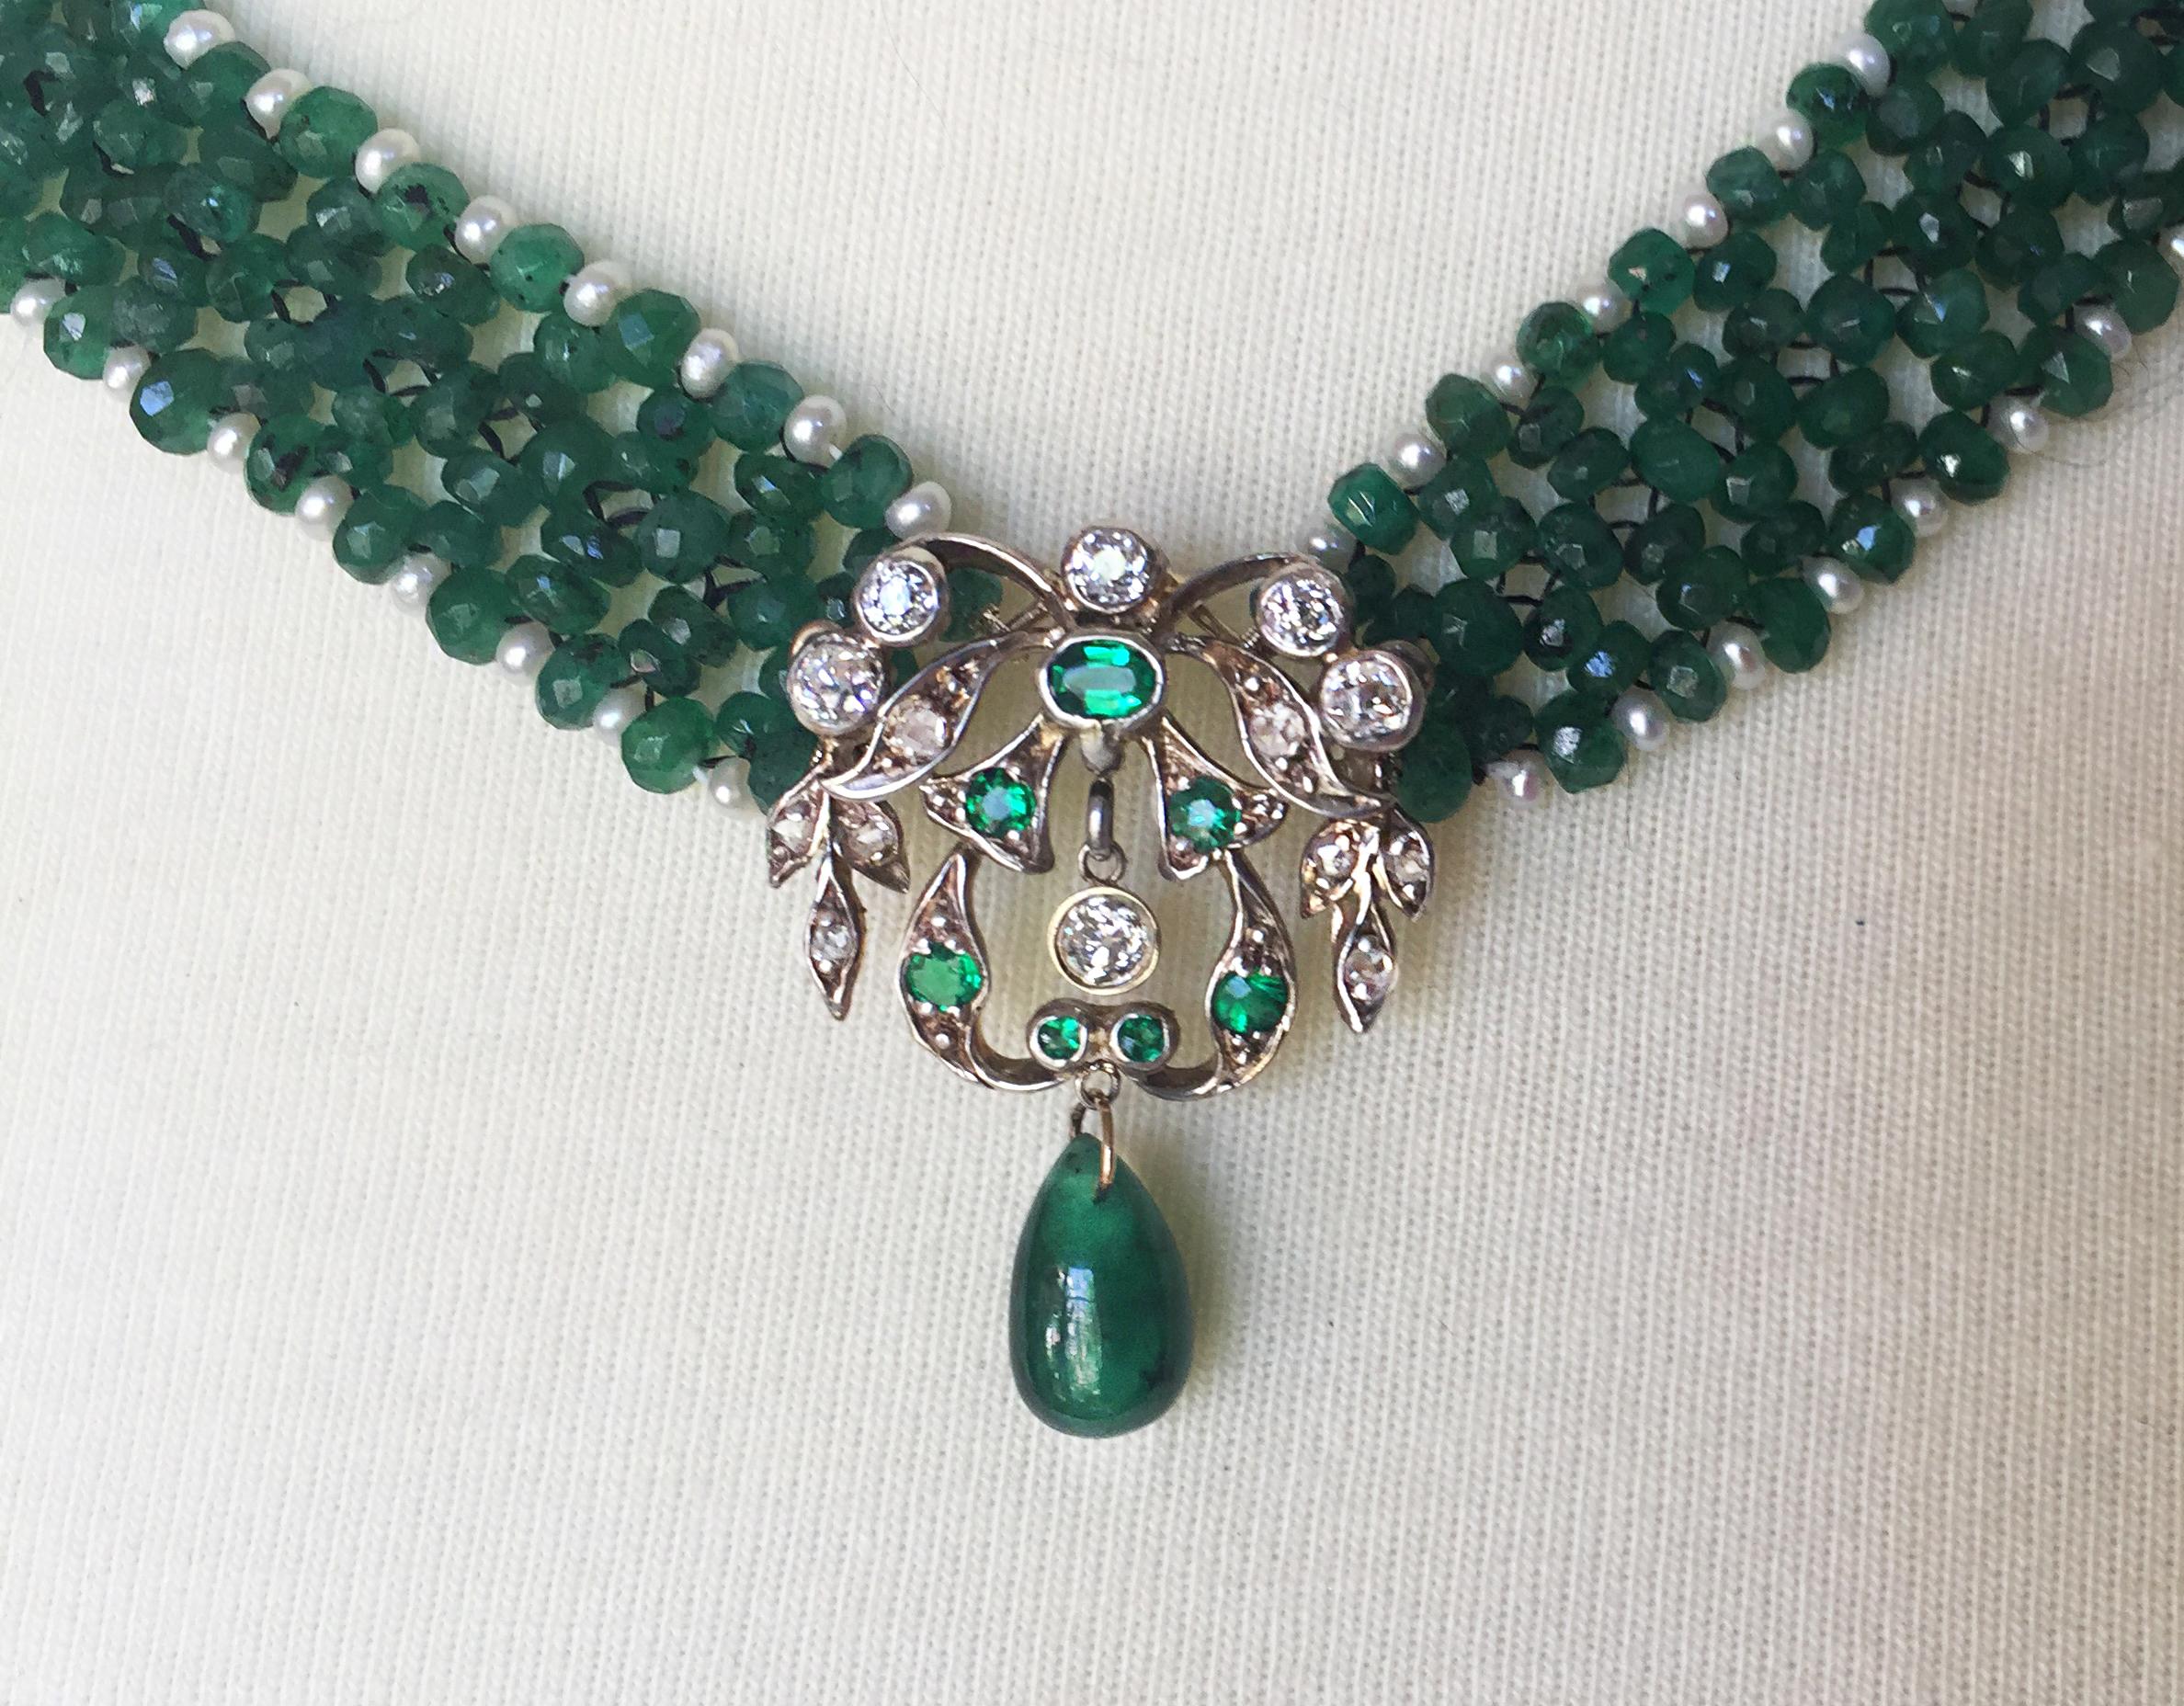 This woven emerald and pearl necklace with vintage diamond and emerald centerpiece is vibrant and striking. Marina J.'s hand made this necklace with attention to detail so that every bead harmonizes perfectly. The brilliant green faceted emerald